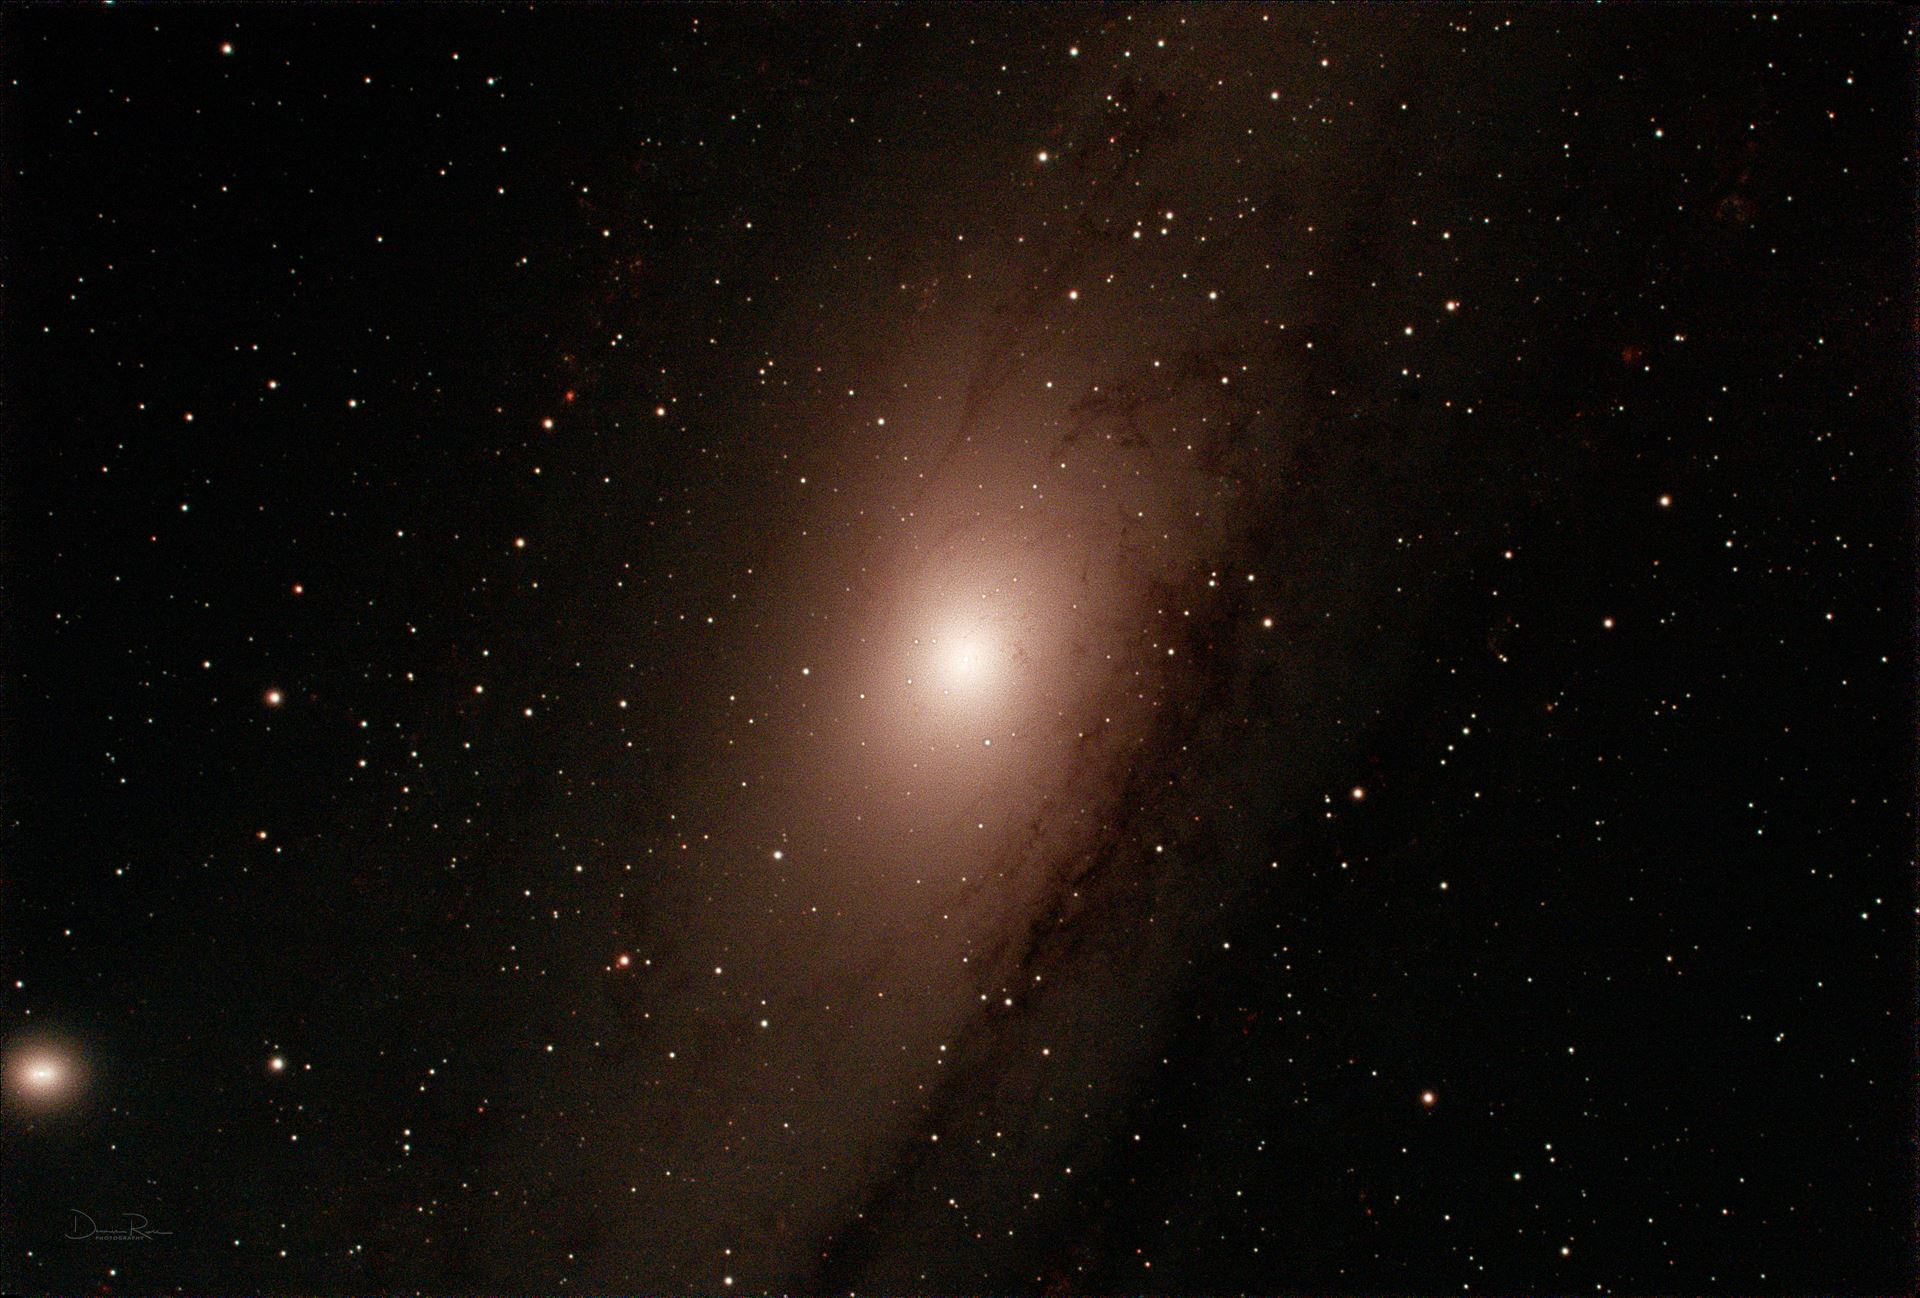 M31_Andromeda_Celstron_8_Edge_HD_.7_reducer-RGB-session_1-St.jpg -  by Dennis Rose